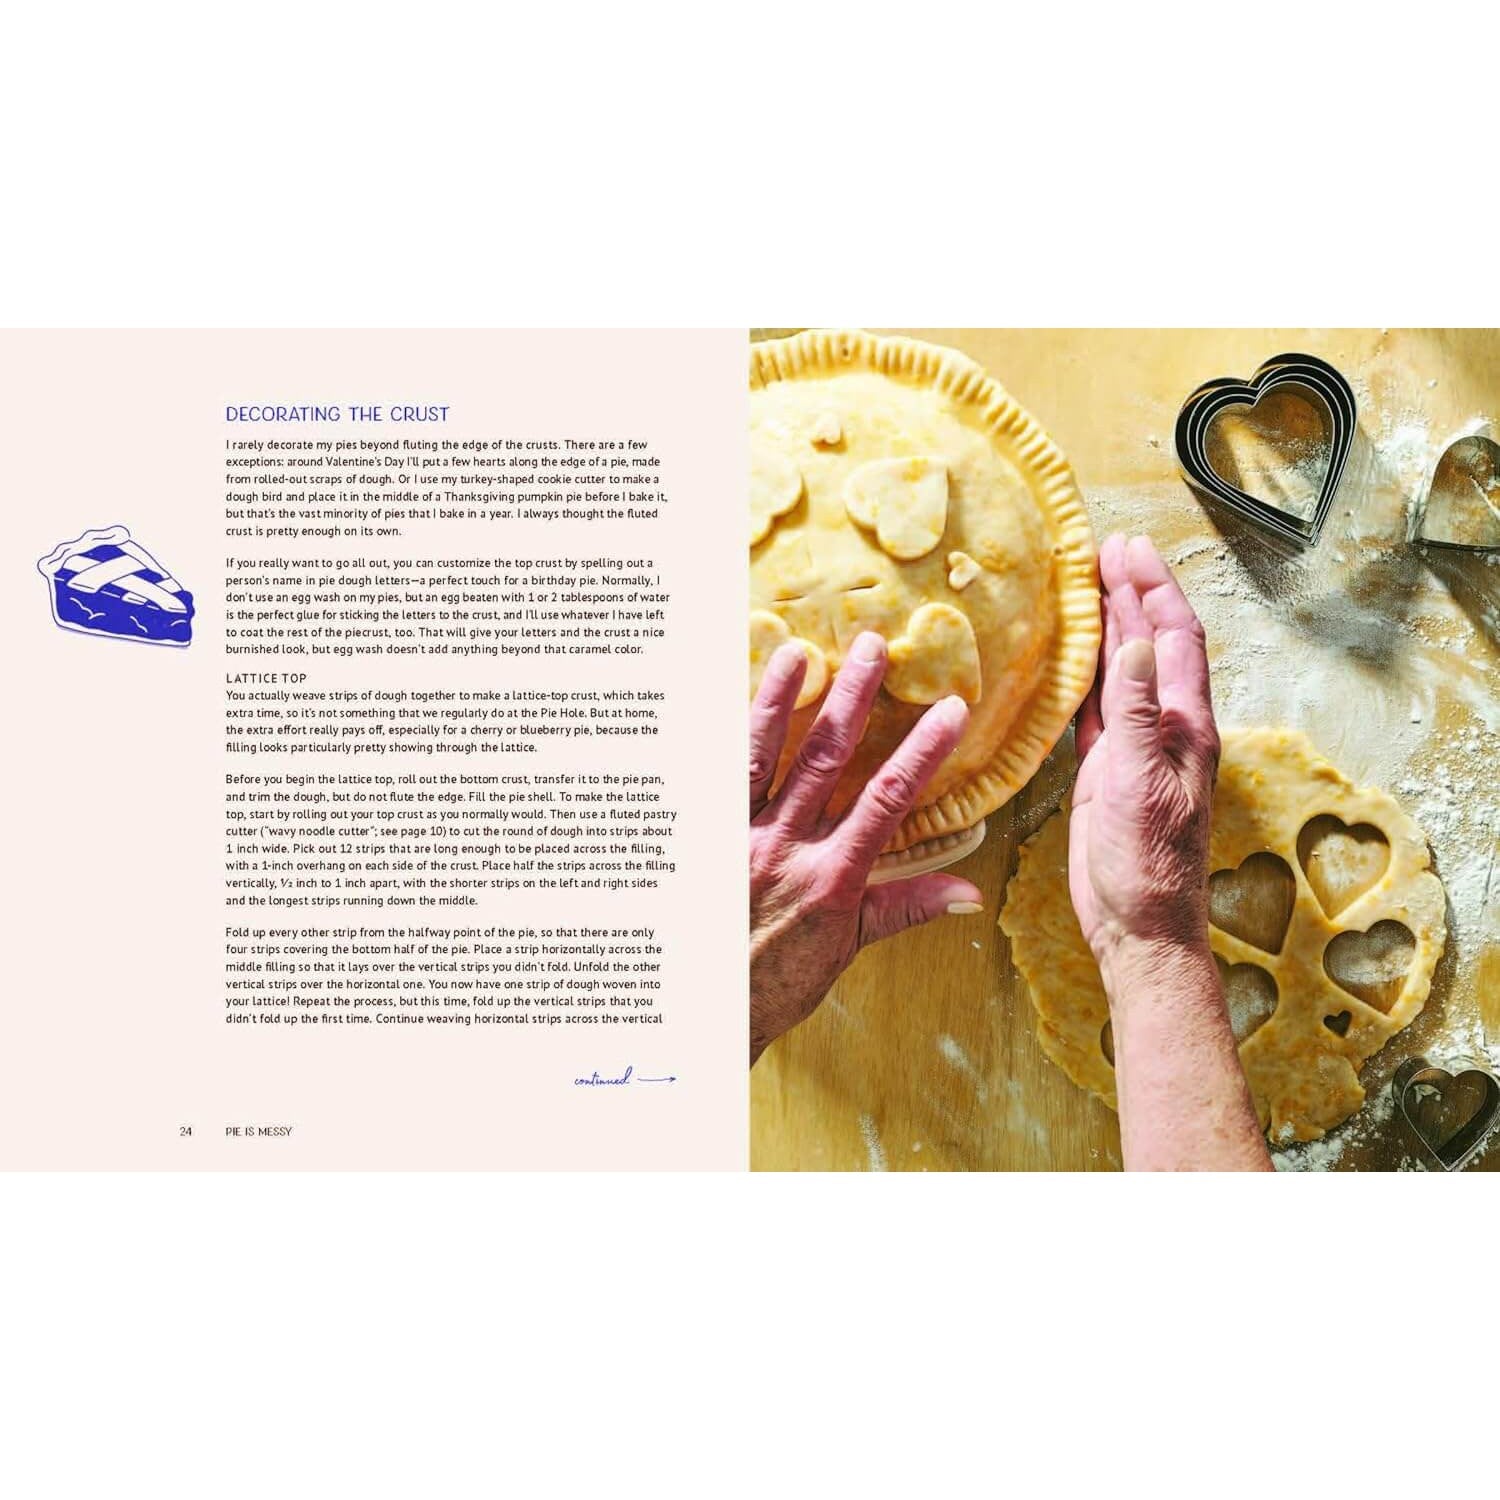 Pie is Messy: Recipes from The Pie Hole